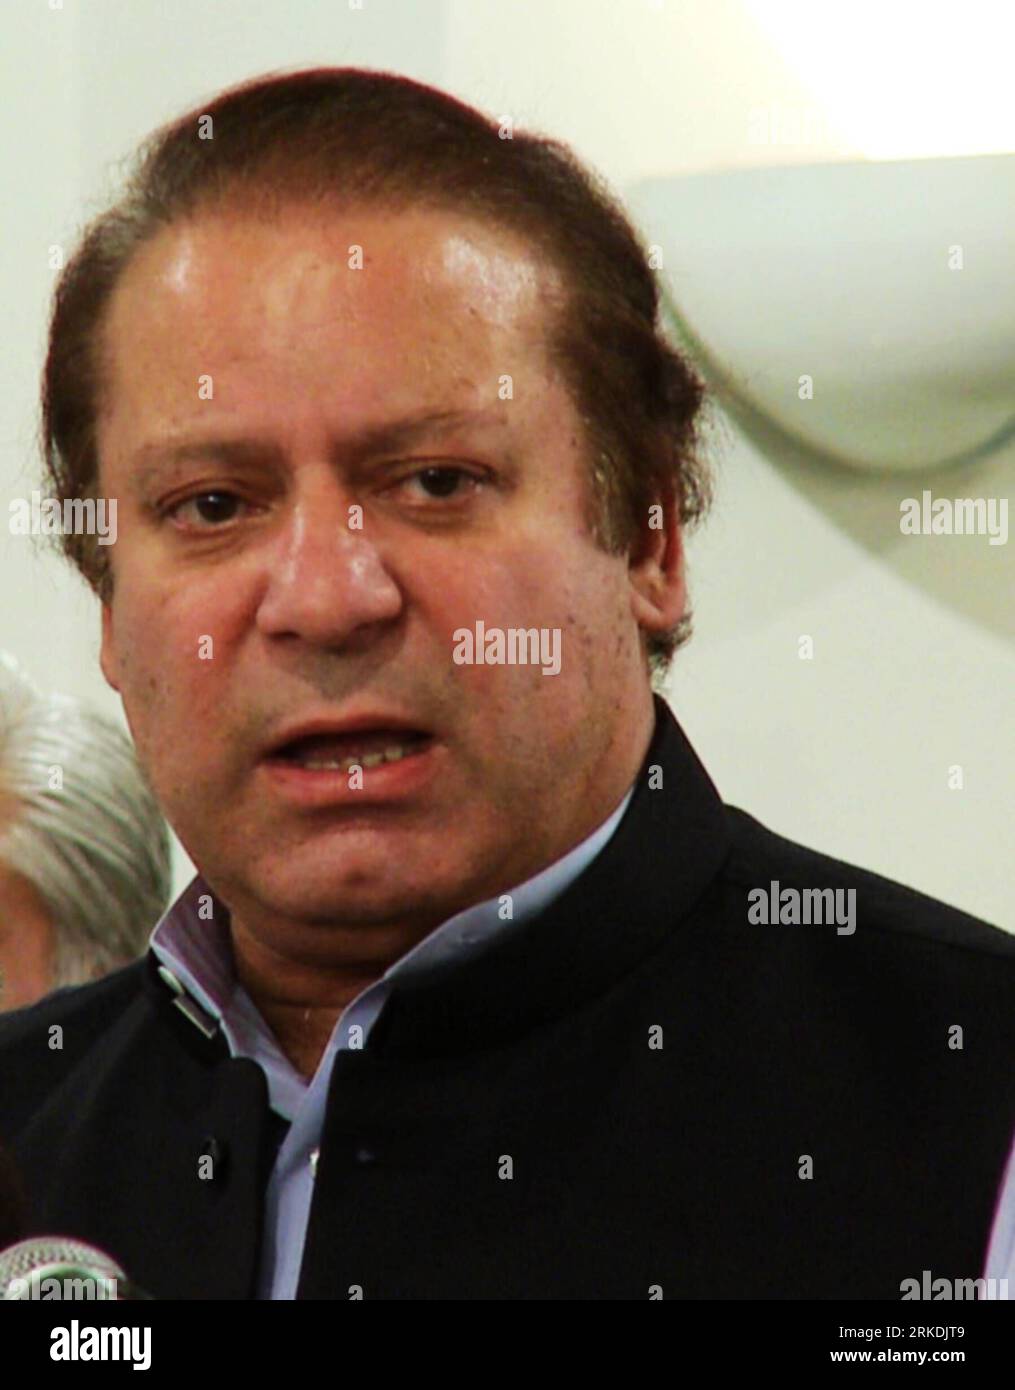 Bildnummer: 54959301  Datum: 25.02.2011  Copyright: imago/Xinhua (110225) -- ISLAMABAD, Feb. 25, 2011 (Xinhua) -- Pakistan s former prime minister and opposition leader Nawaz Sharif speaks during a news conference in Islamabad, Pakistan, on Feb. 25, 2011. Pakistan s largest opposition party ended its coalition with the party of President Asif Ali Zardari in the country s most populous province, dealing a blow to the national government. (Xinhua/Zeeshan Niazi) (xhn) PAKISTAN-ISLAMABAD-POLITICS PUBLICATIONxNOTxINxCHN People Politik Porträt kbdig xo0x xsk 2011 hoch     Bildnummer 54959301 Date 25 Stock Photo